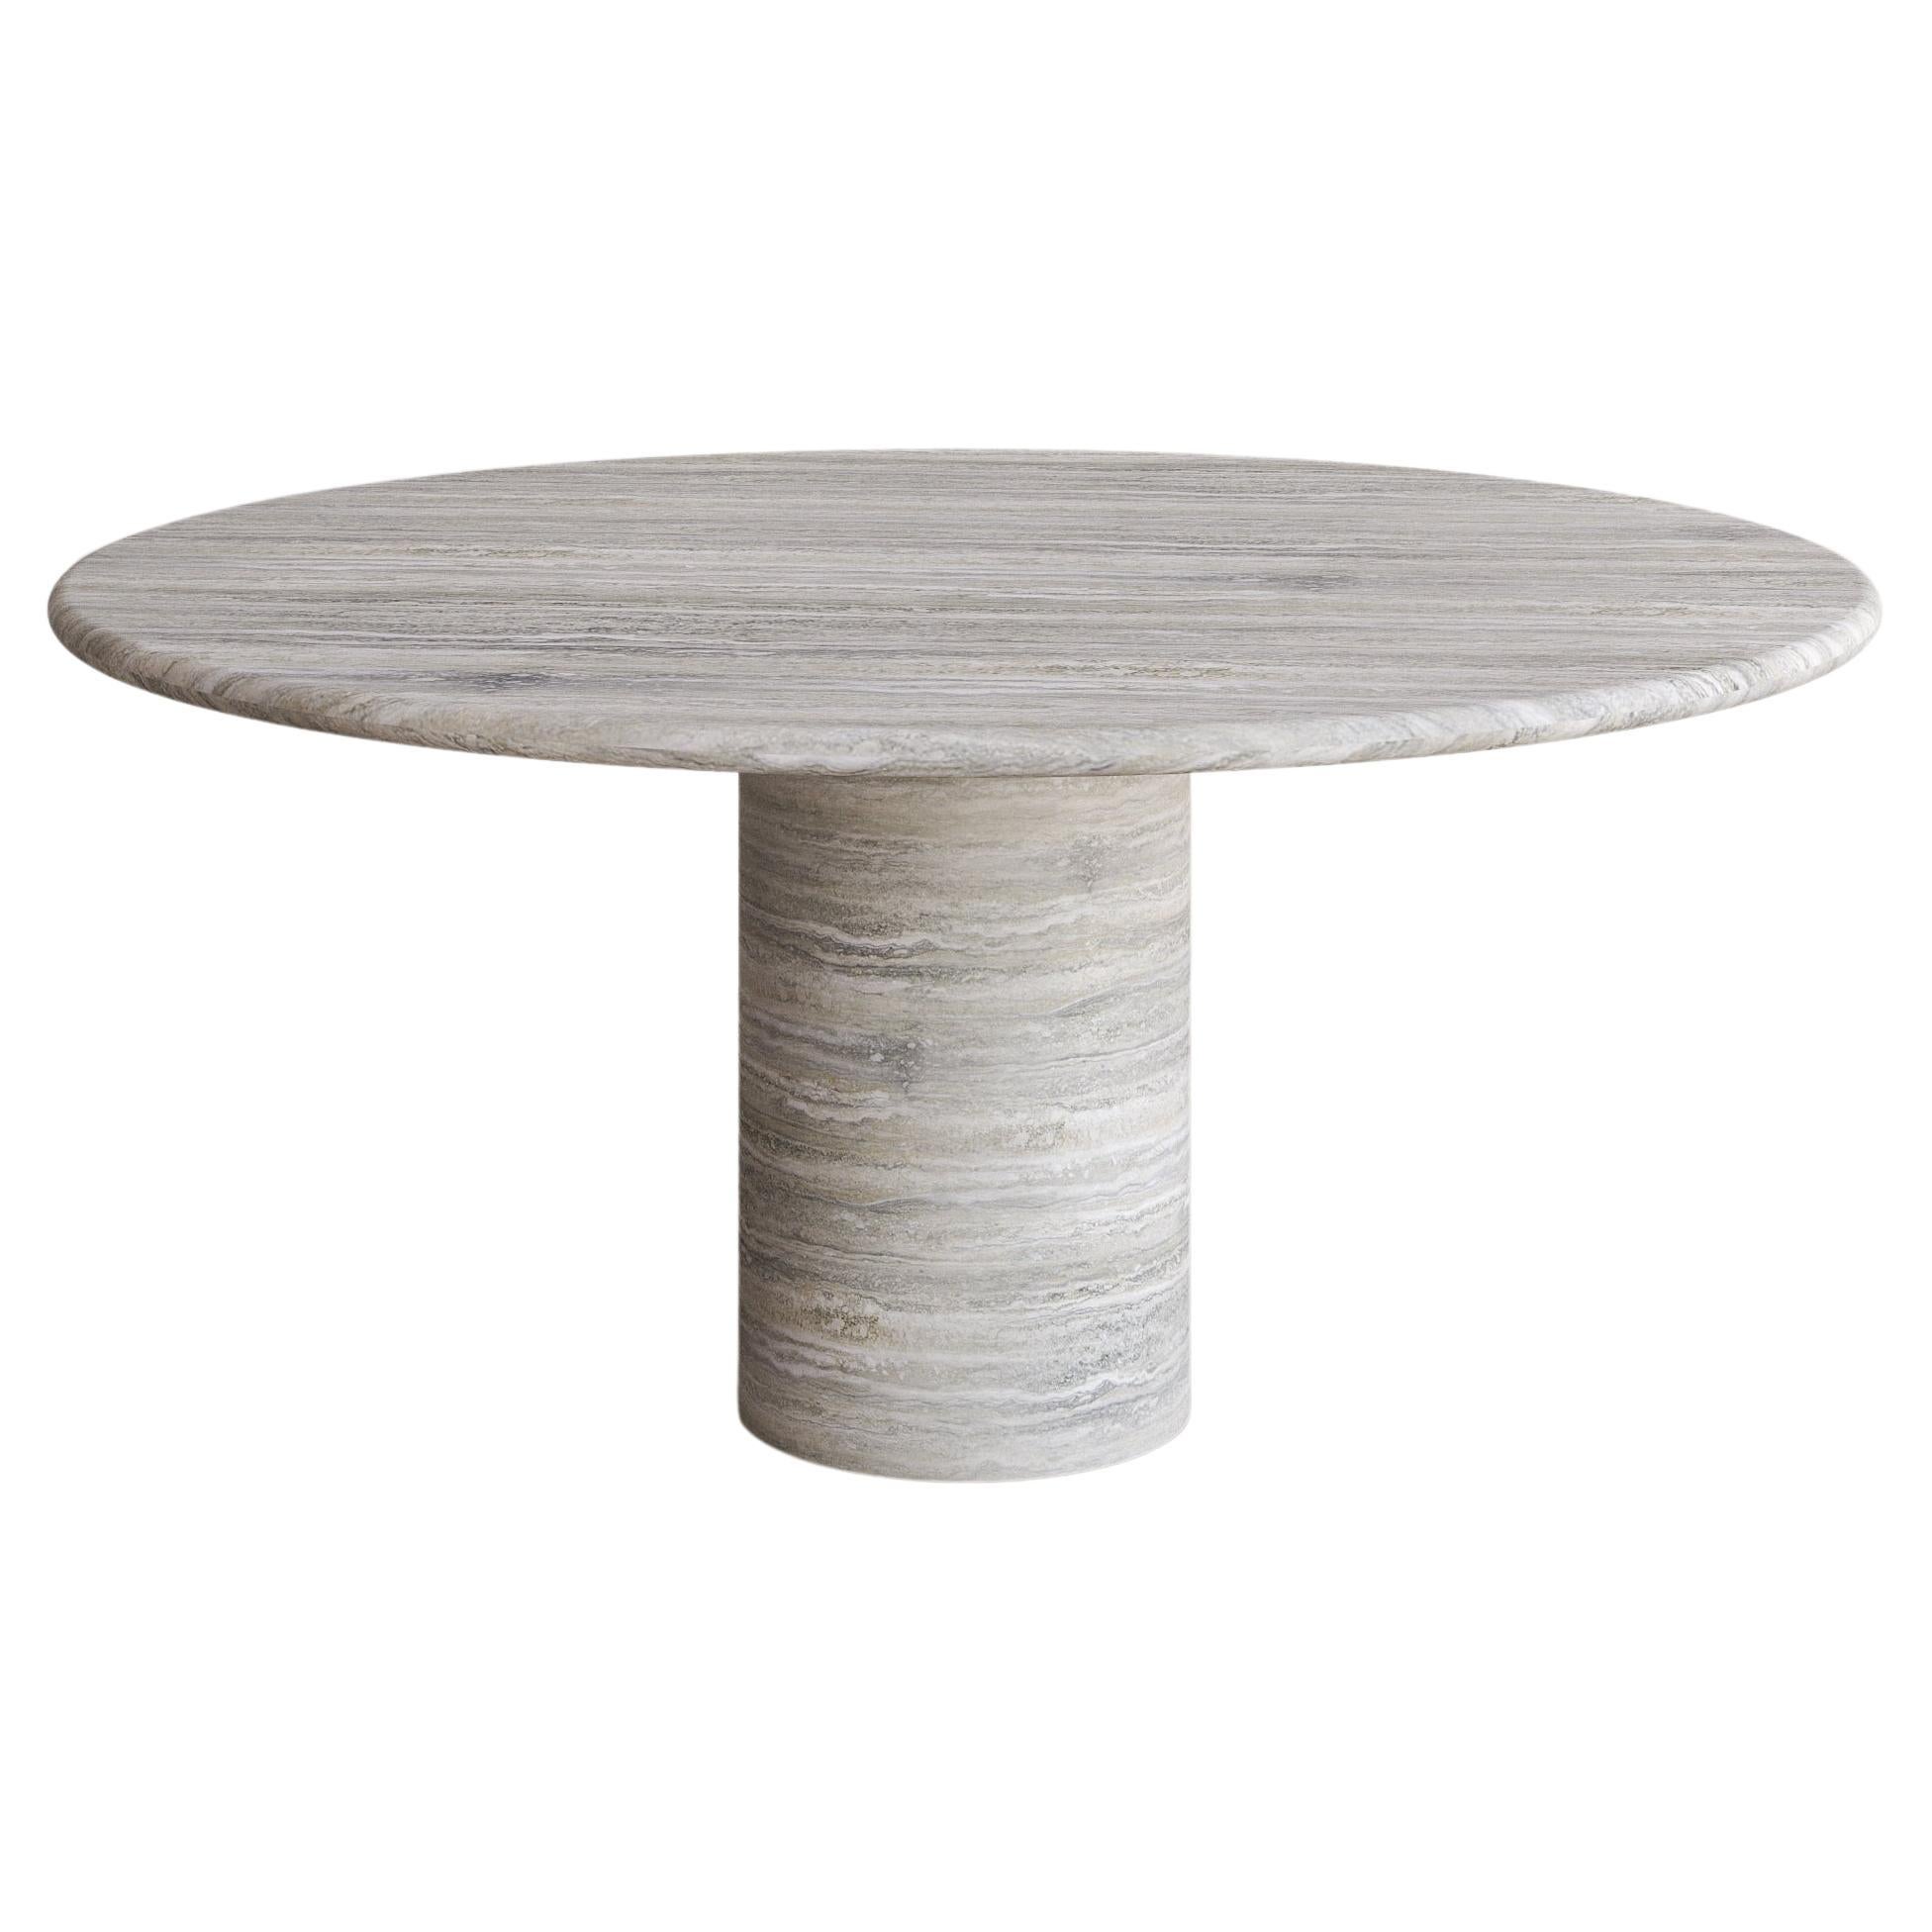 Silver Travertine Voyage Dining Table i by the Essentialist For Sale